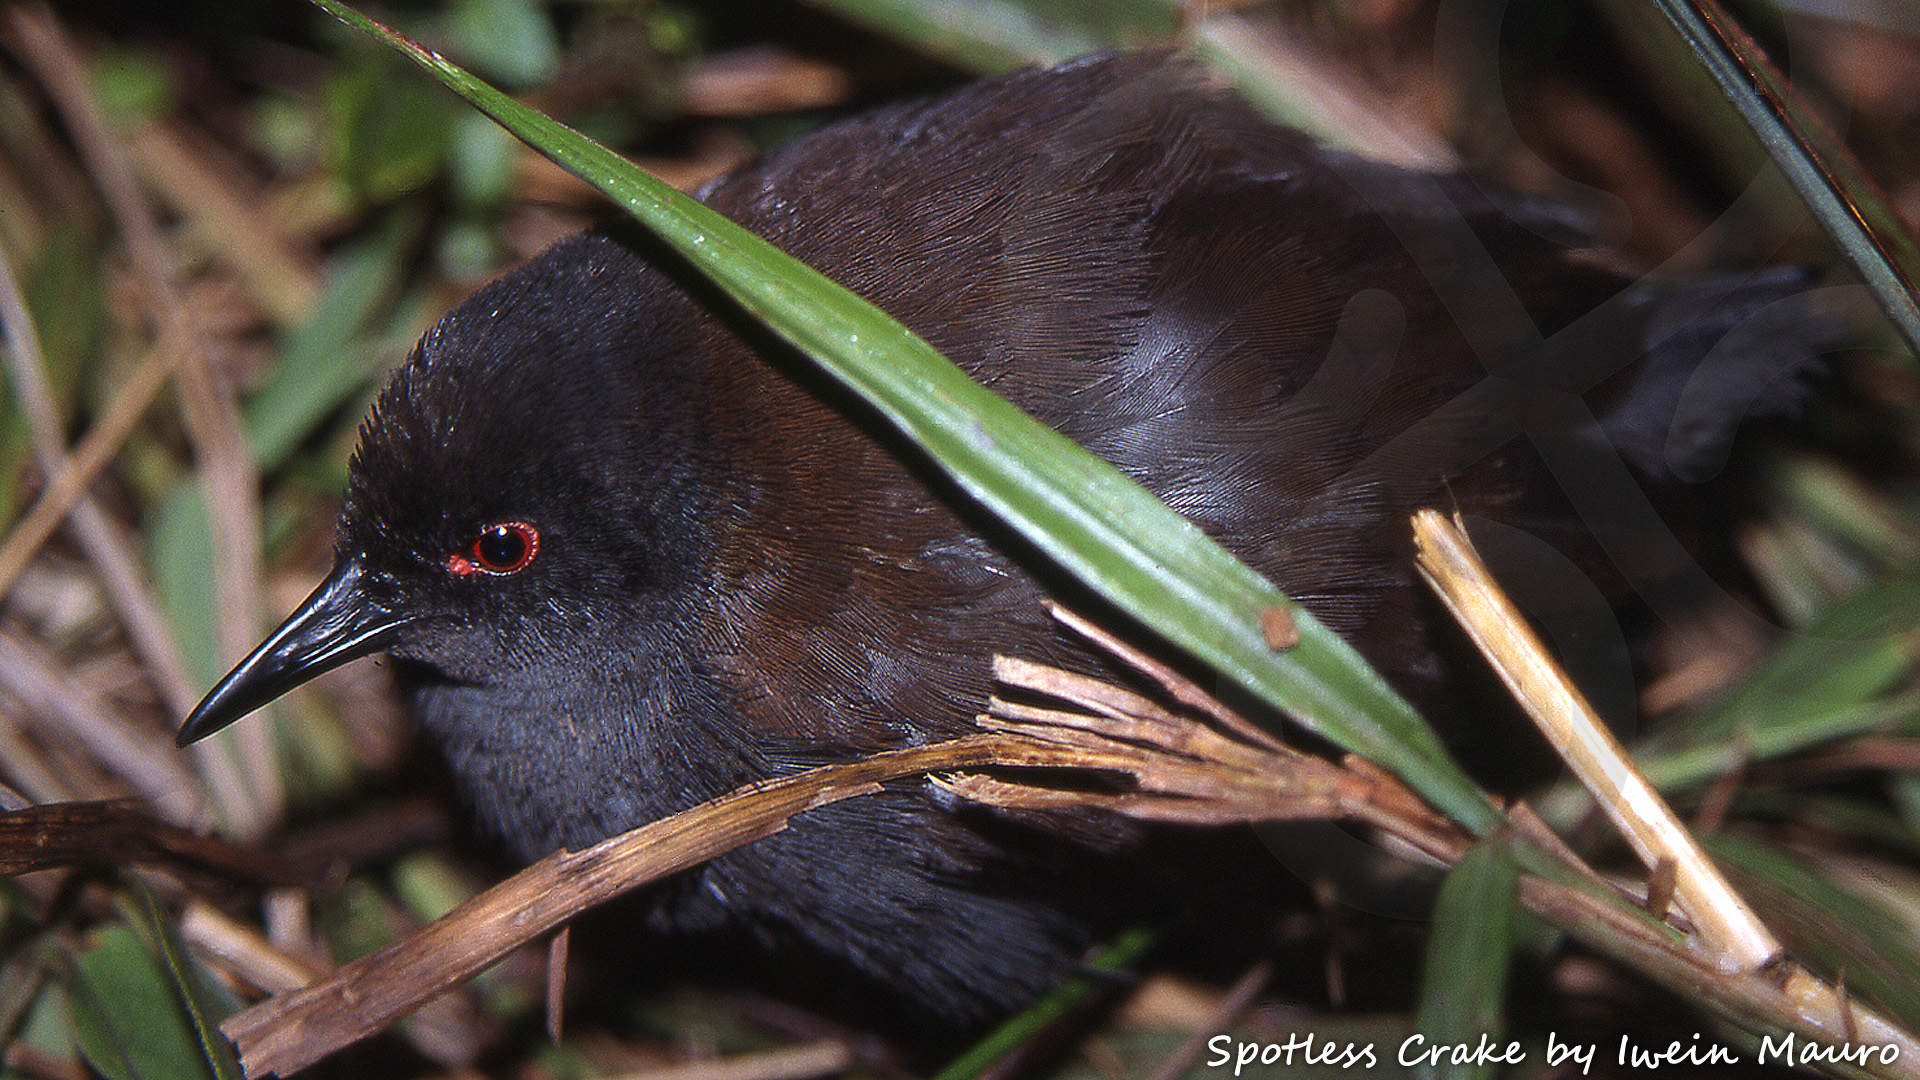 Spotless Crake Porzana tabuensis is the commonest species of rail in the mid-montane wet grasslands of the Anggi Giji basin in the Arfak Mountains on New Guinea's Bird's Head or Vogelkop Peninsula. Copyright © Iwein Mauro